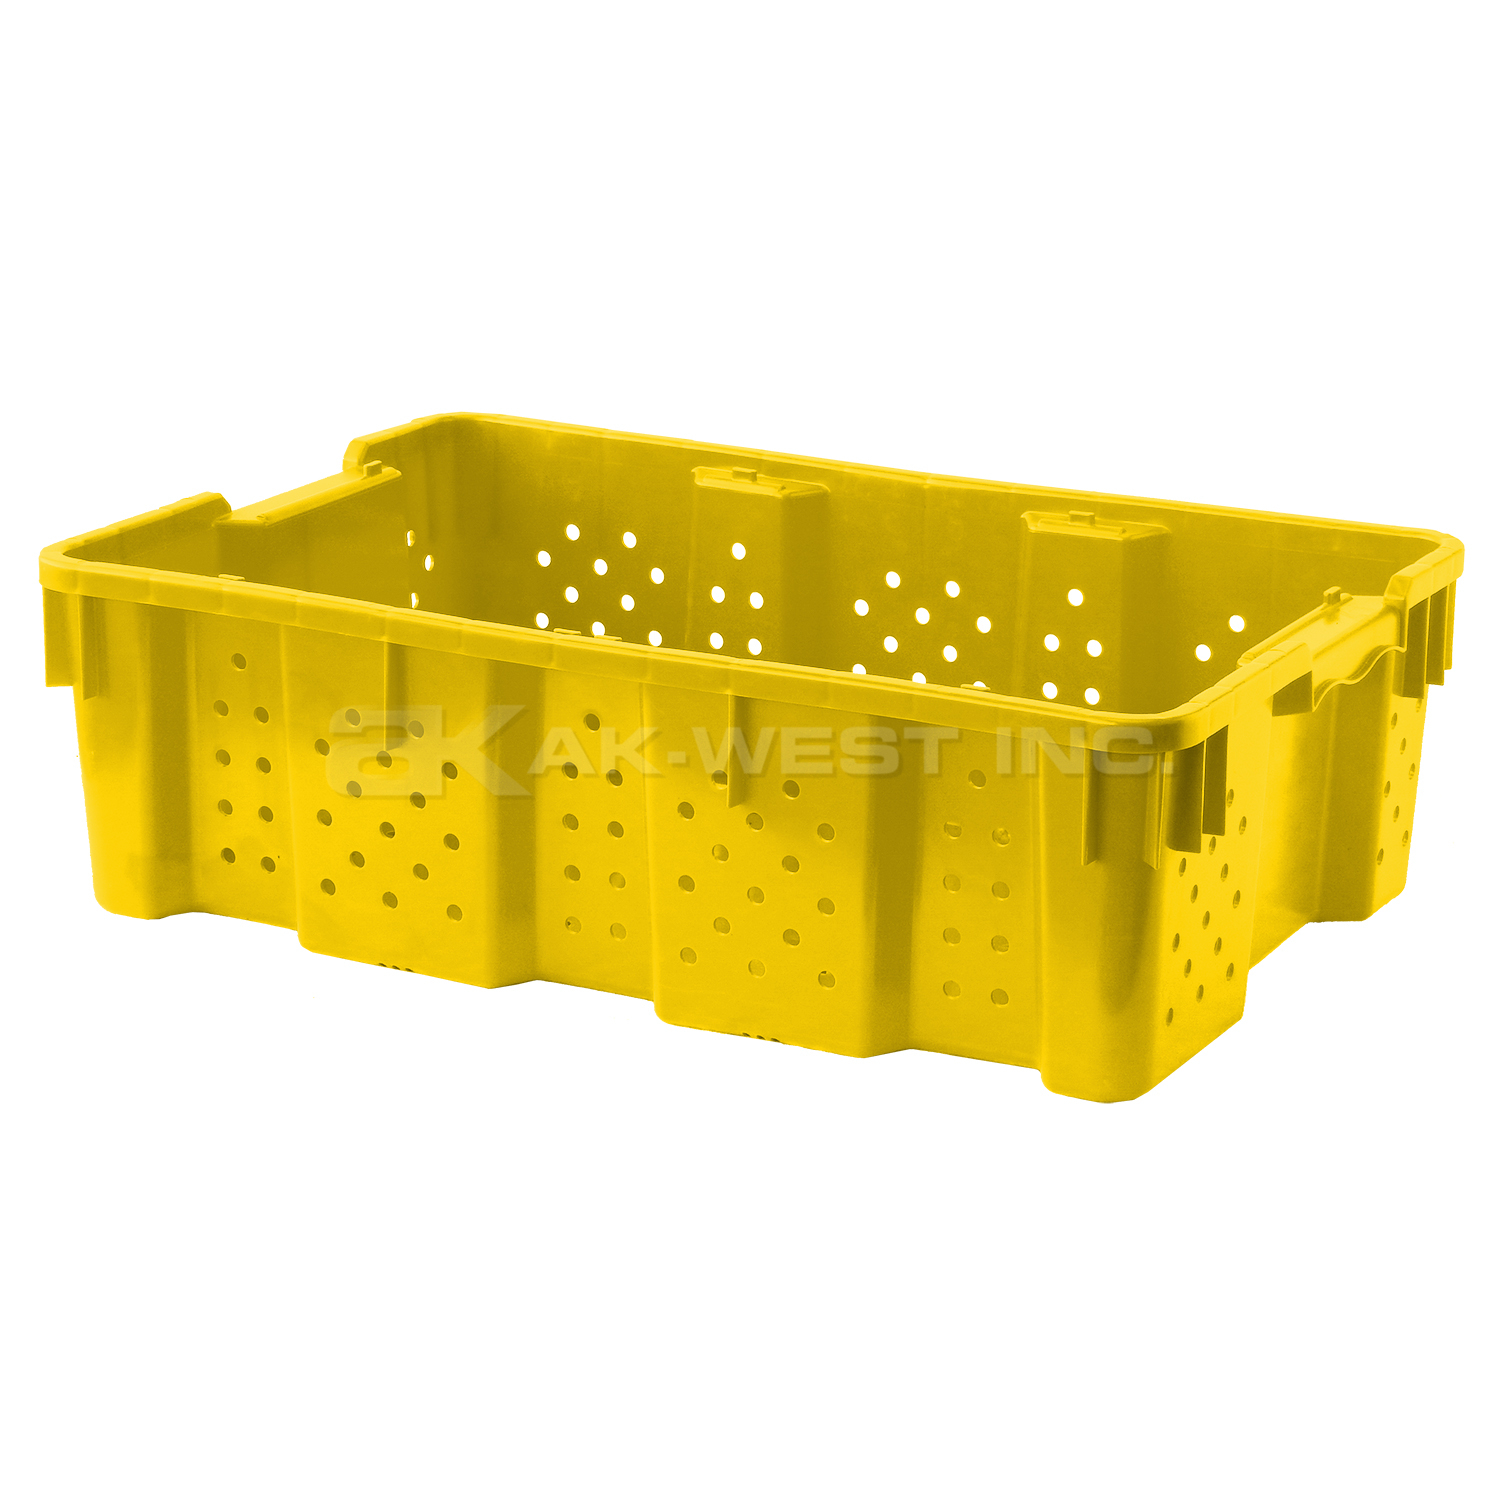 Yellow, 24"L x 16"W x 7"H Stack and Nest Container w/ Vented Sides and Base